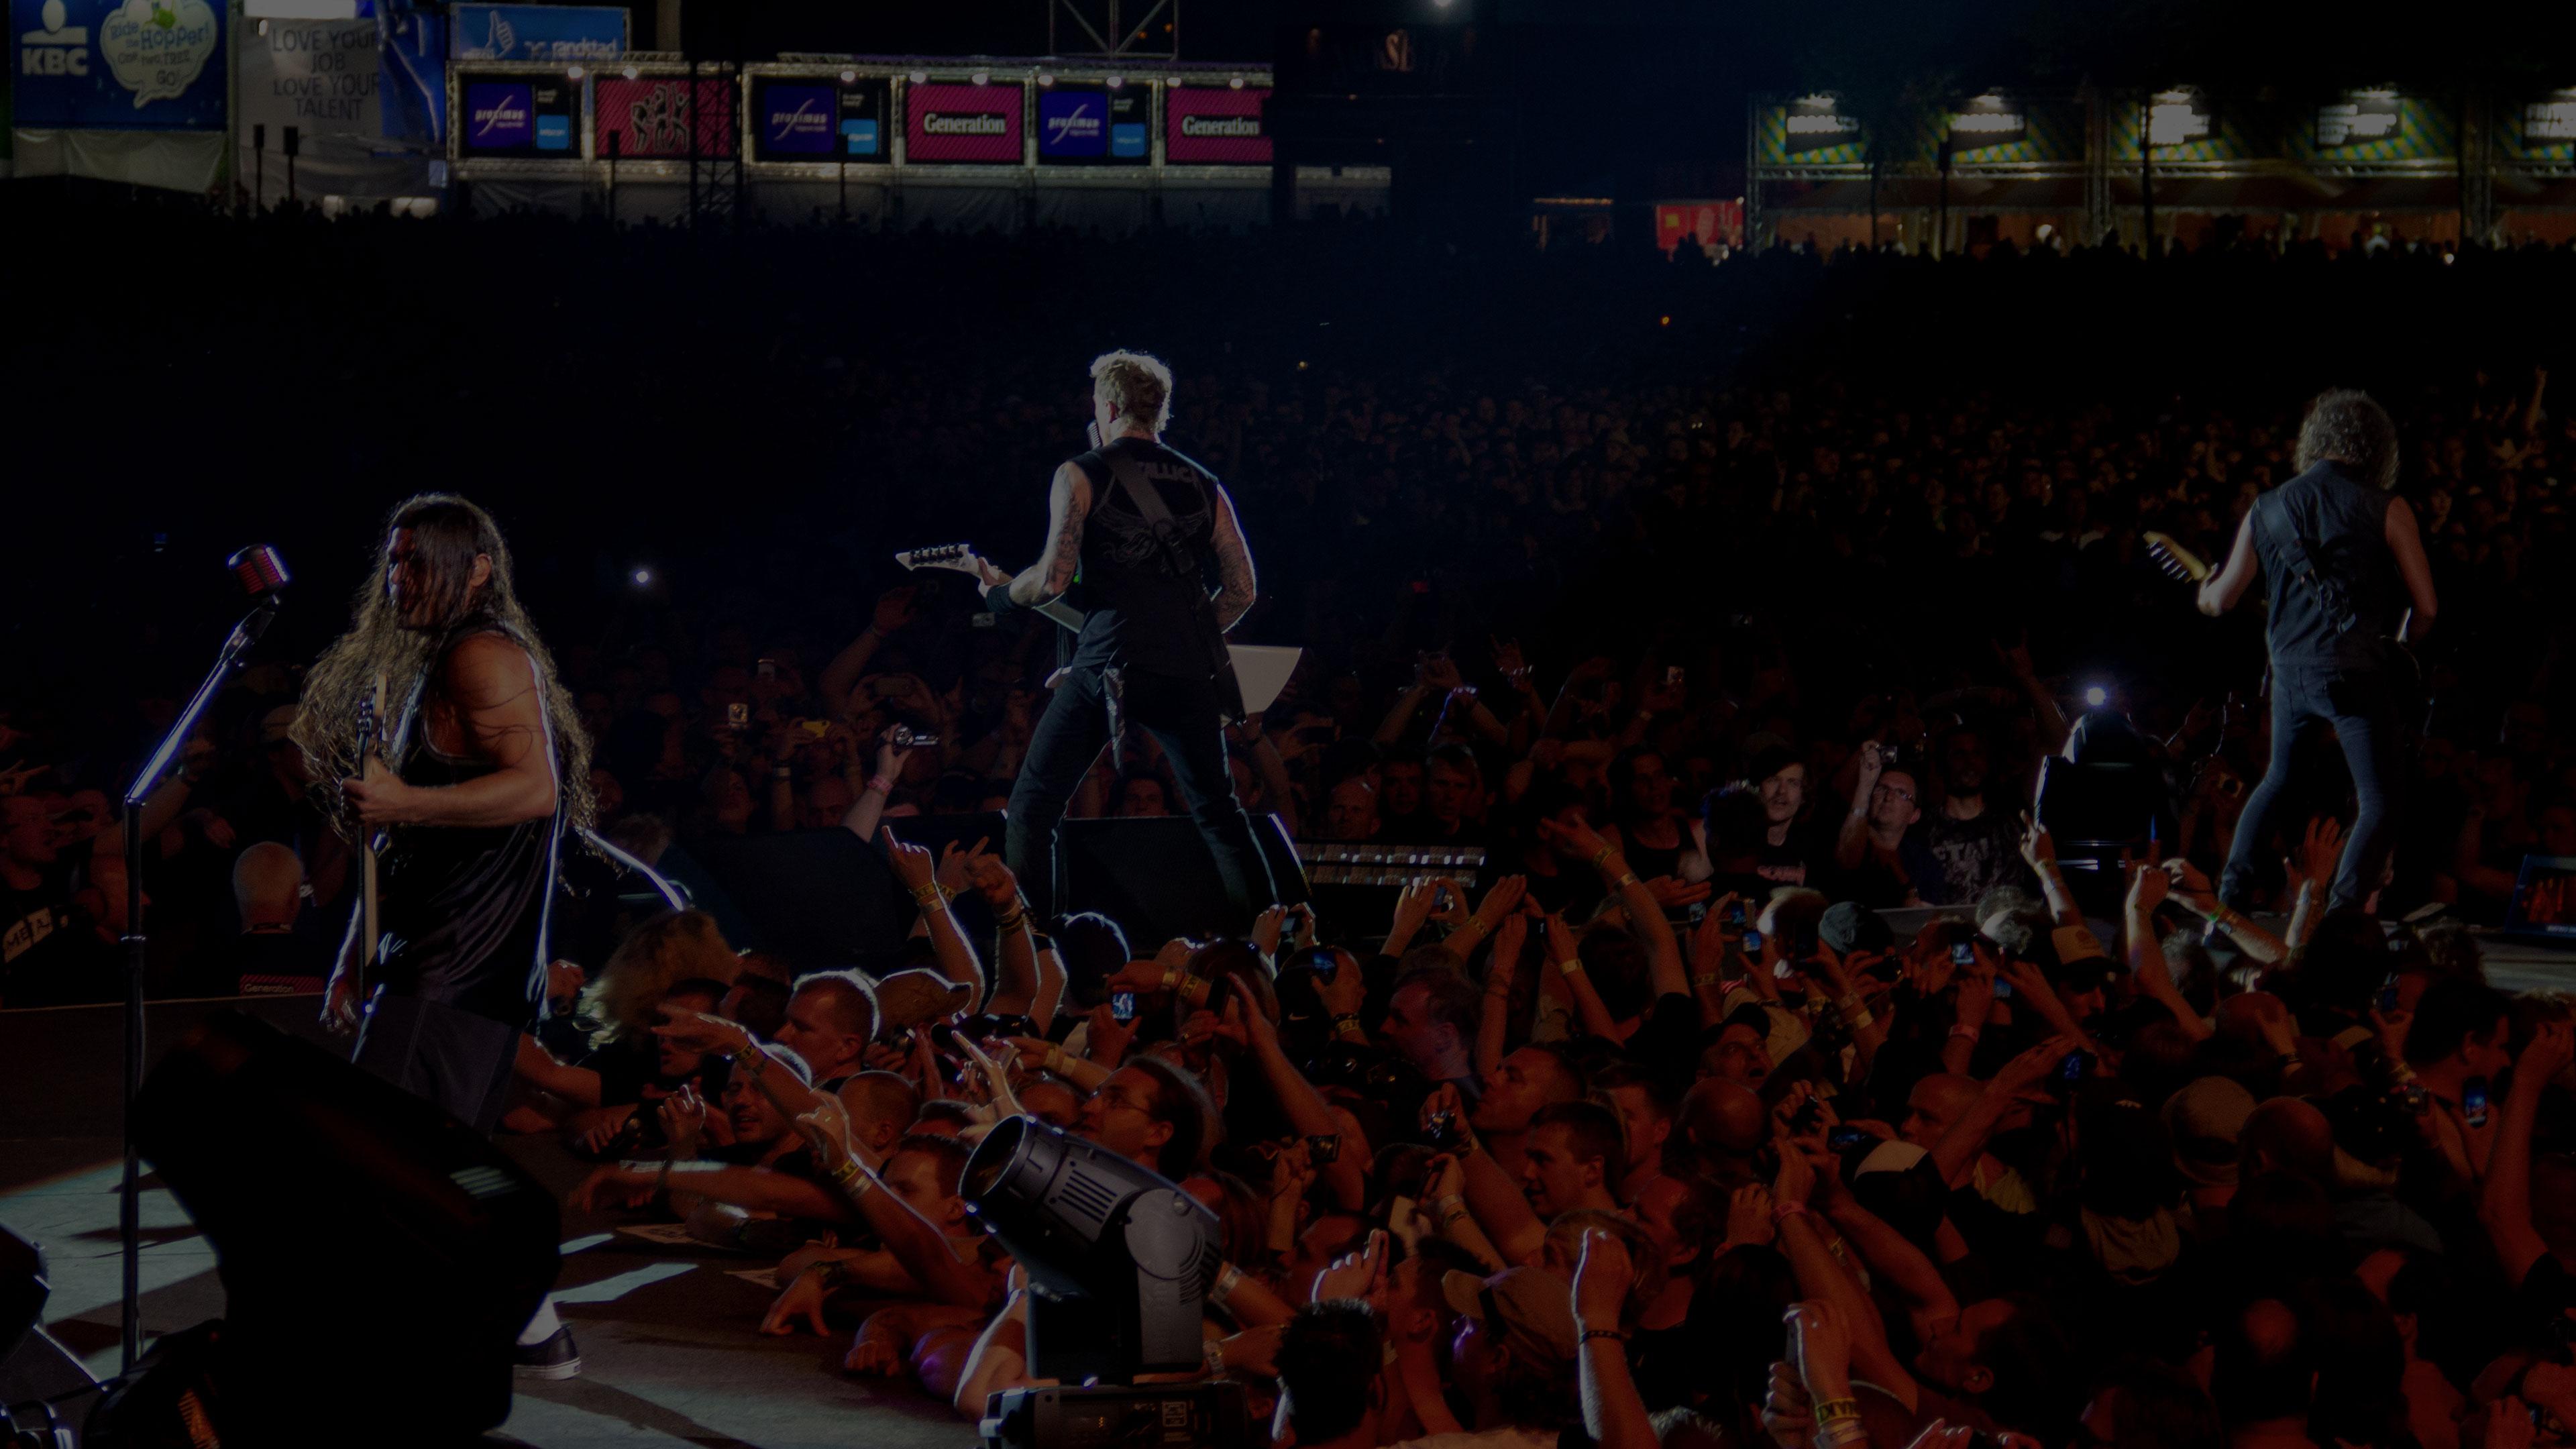 Metallica at Werchter Boutique at Festivalpark in Werchter, Belgium on May 28, 2012